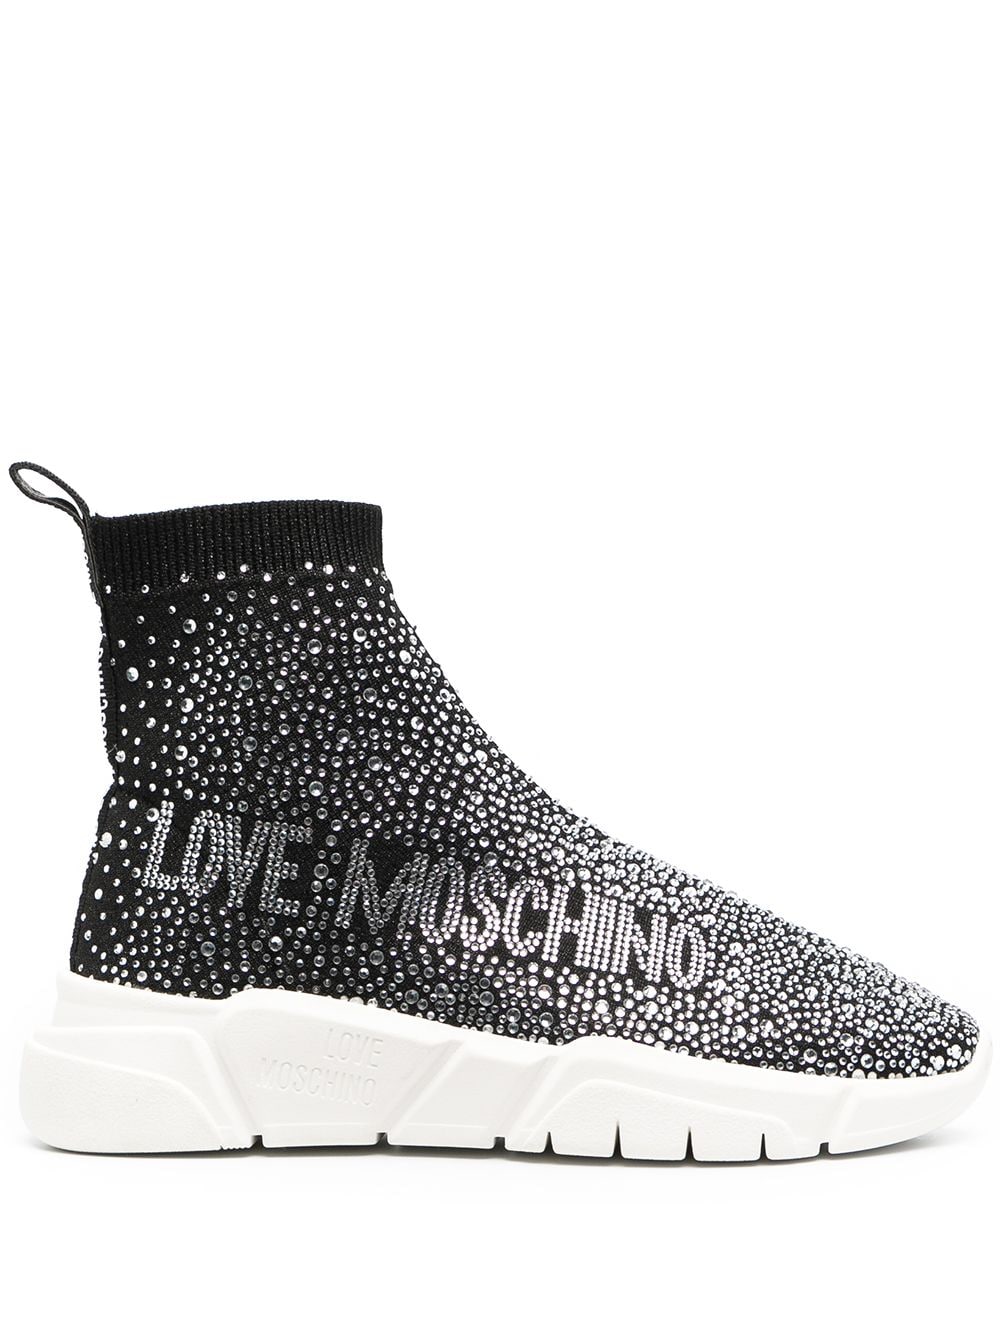 LOVE MOSCHINO CRYSTAL EMBELLISHED SLIP ON SNEAKERS